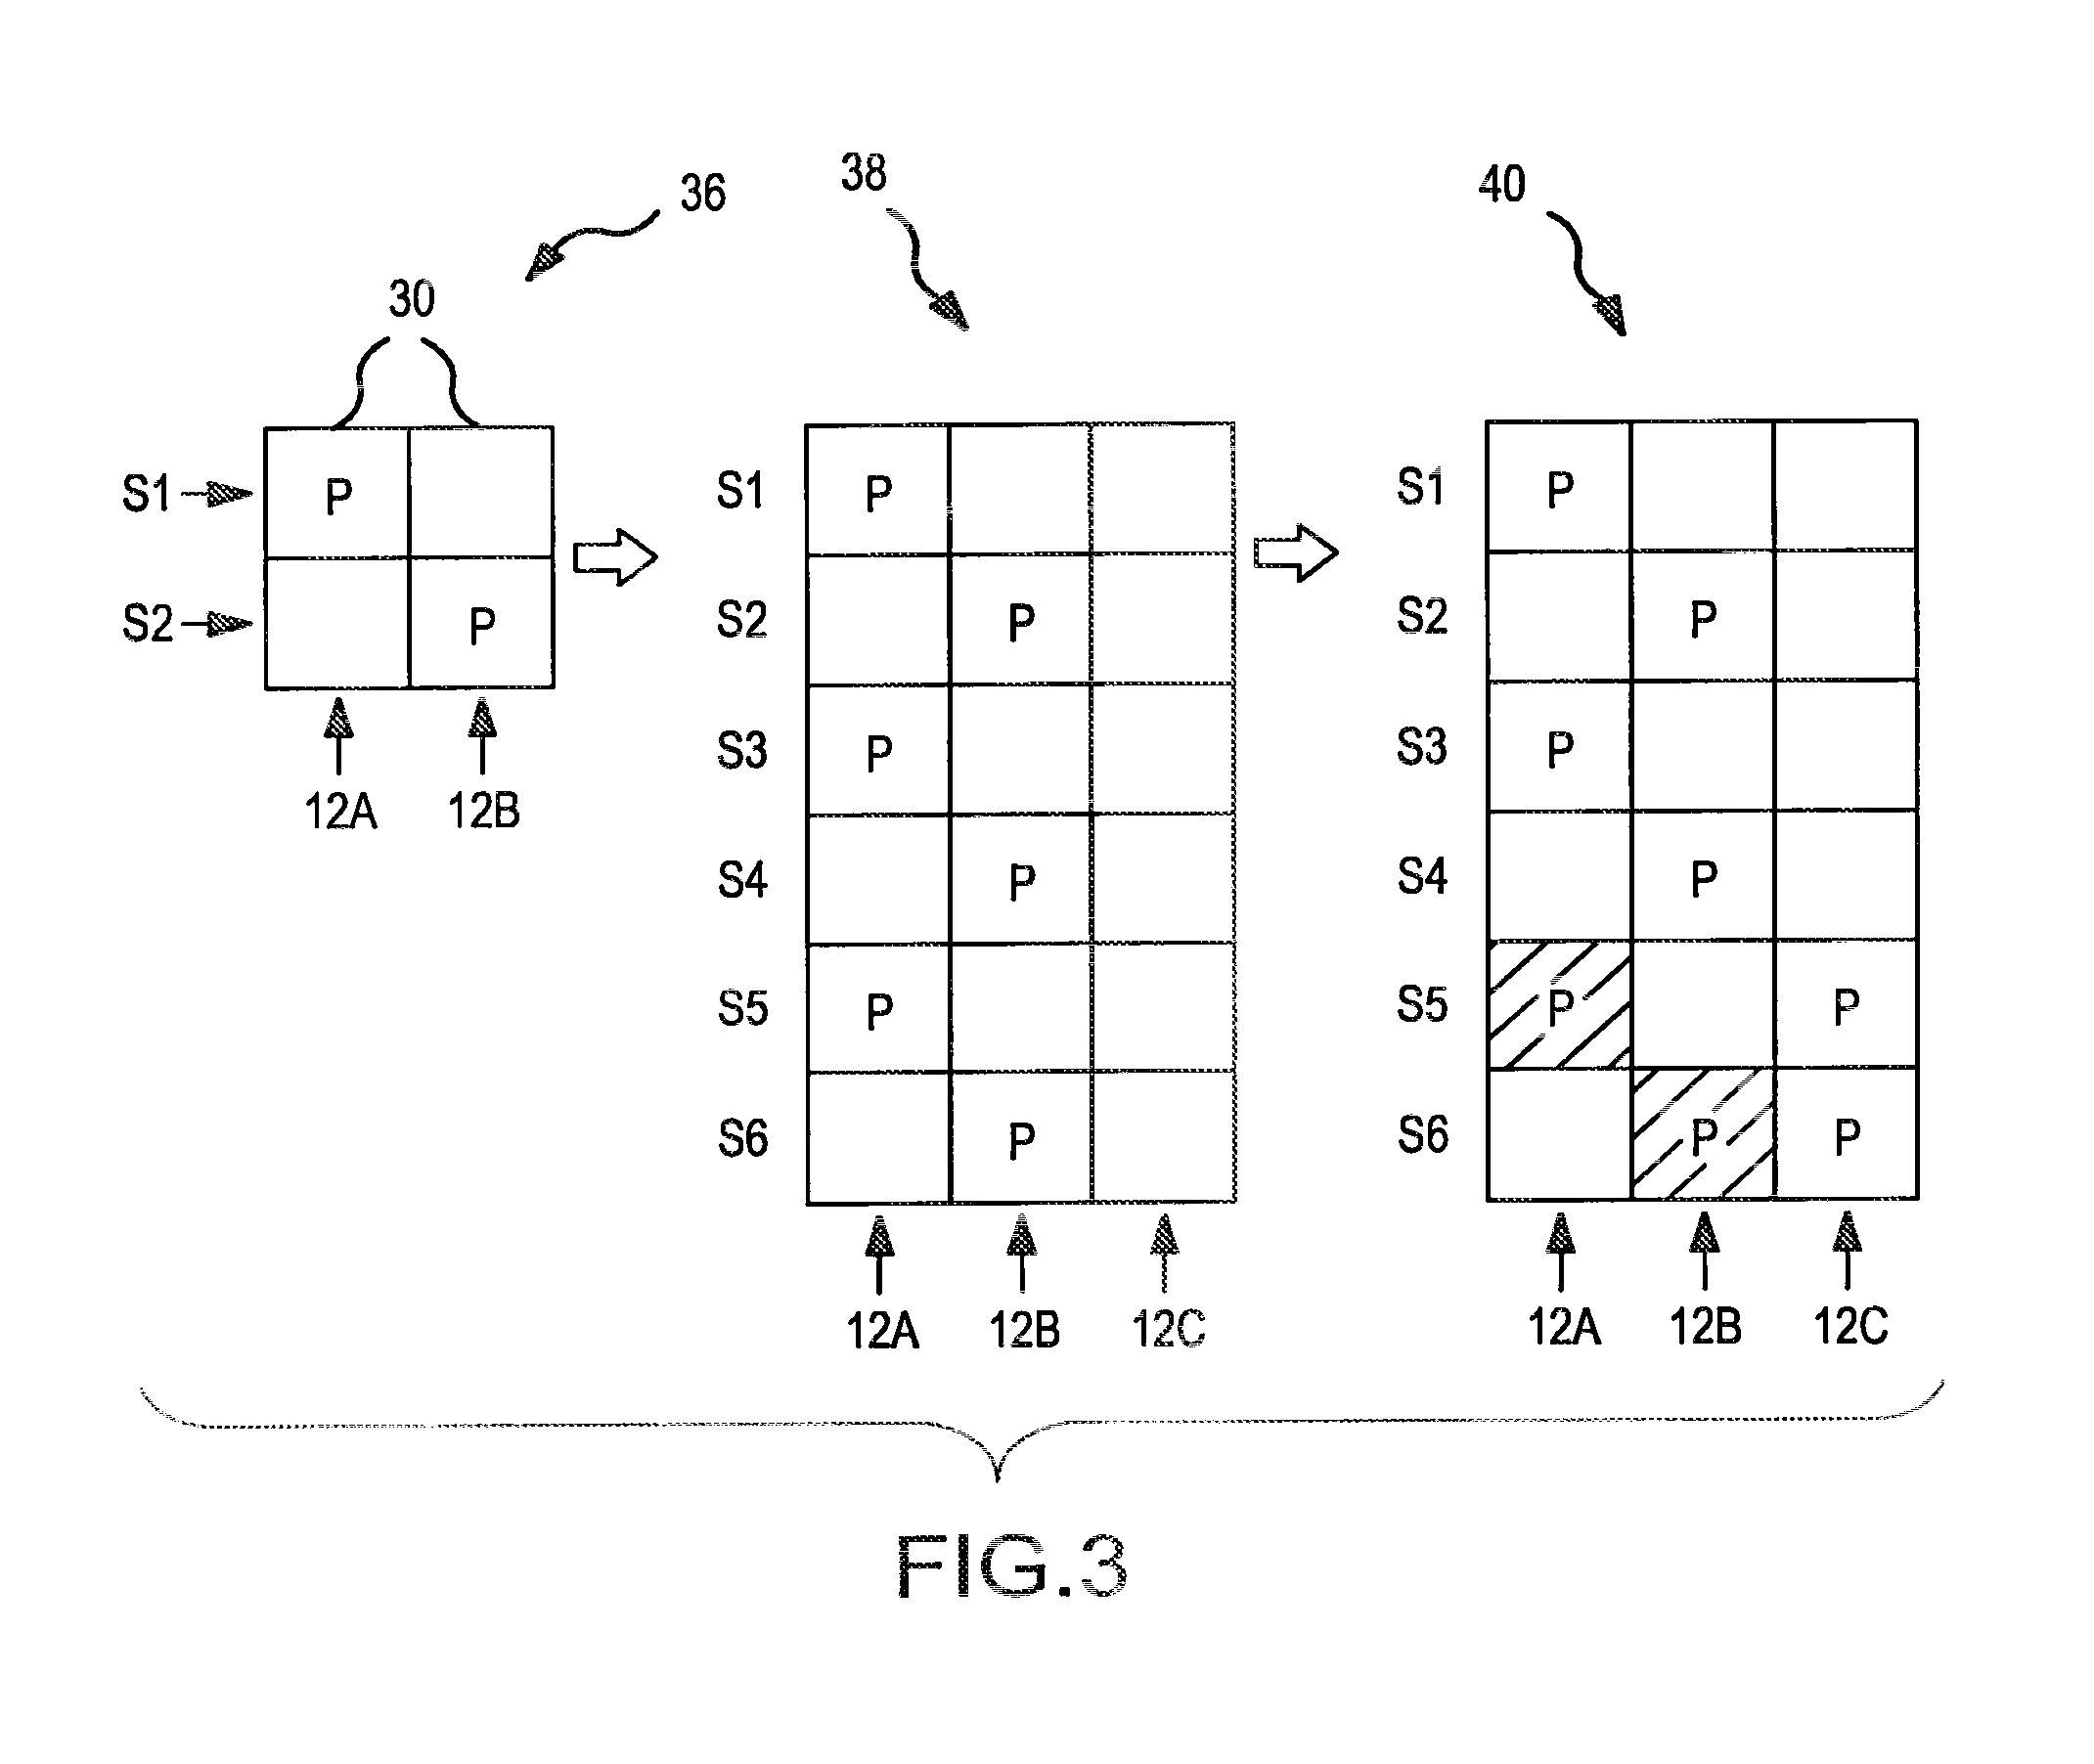 Dynamic load balancing of distributed parity in a raid array